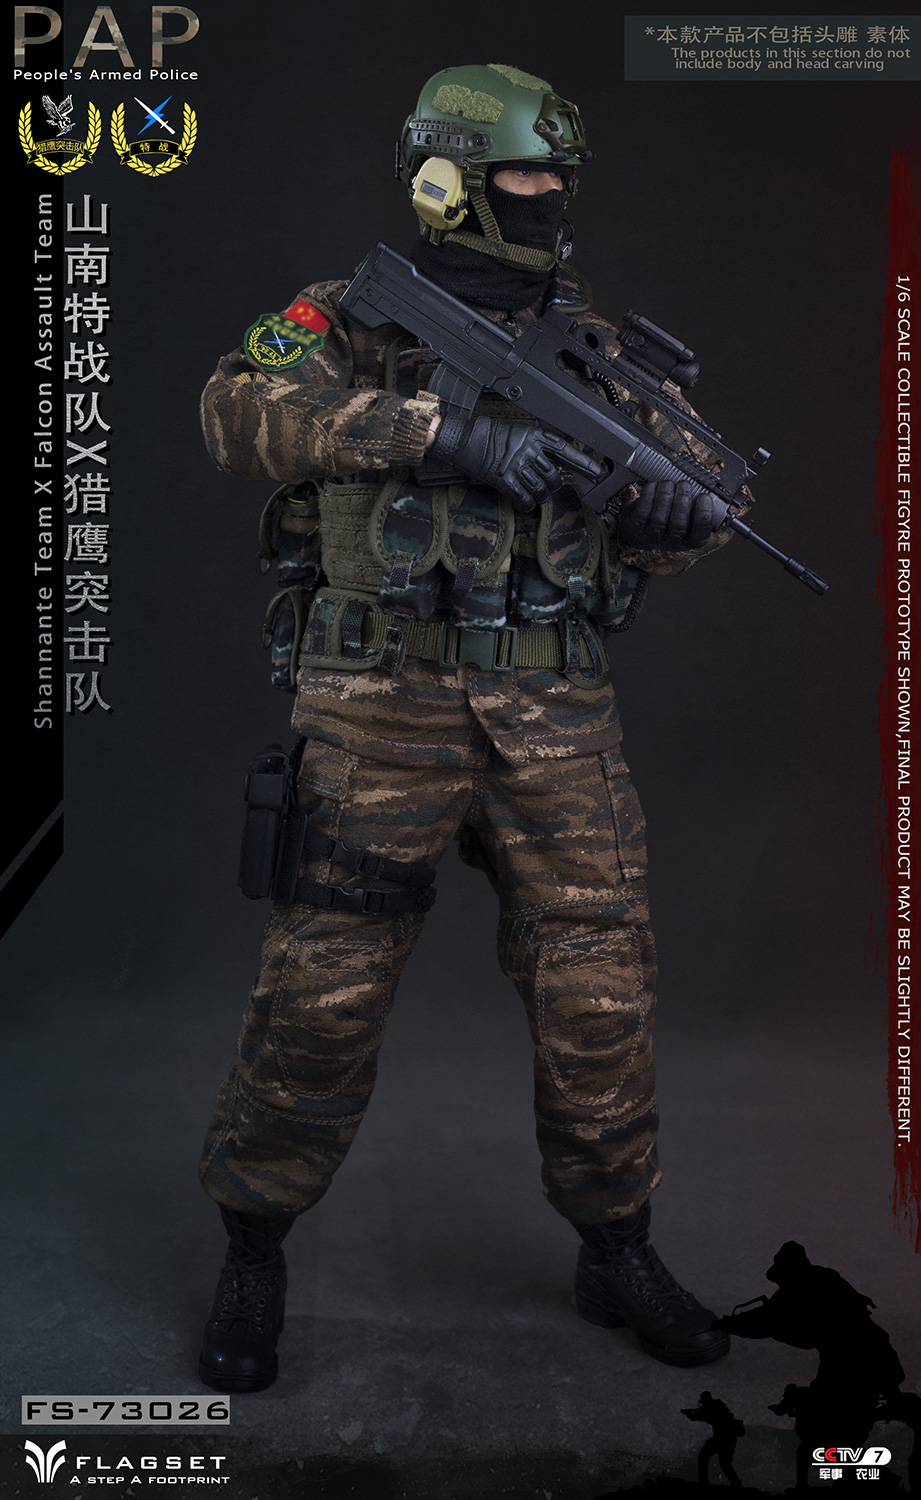 clothing - NEW PRODUCT: Flagset: 1/6 Chinese armed police special team - Shannan detachment / Falcon commando Wudong camouflage suit (FS73026#) 01104410